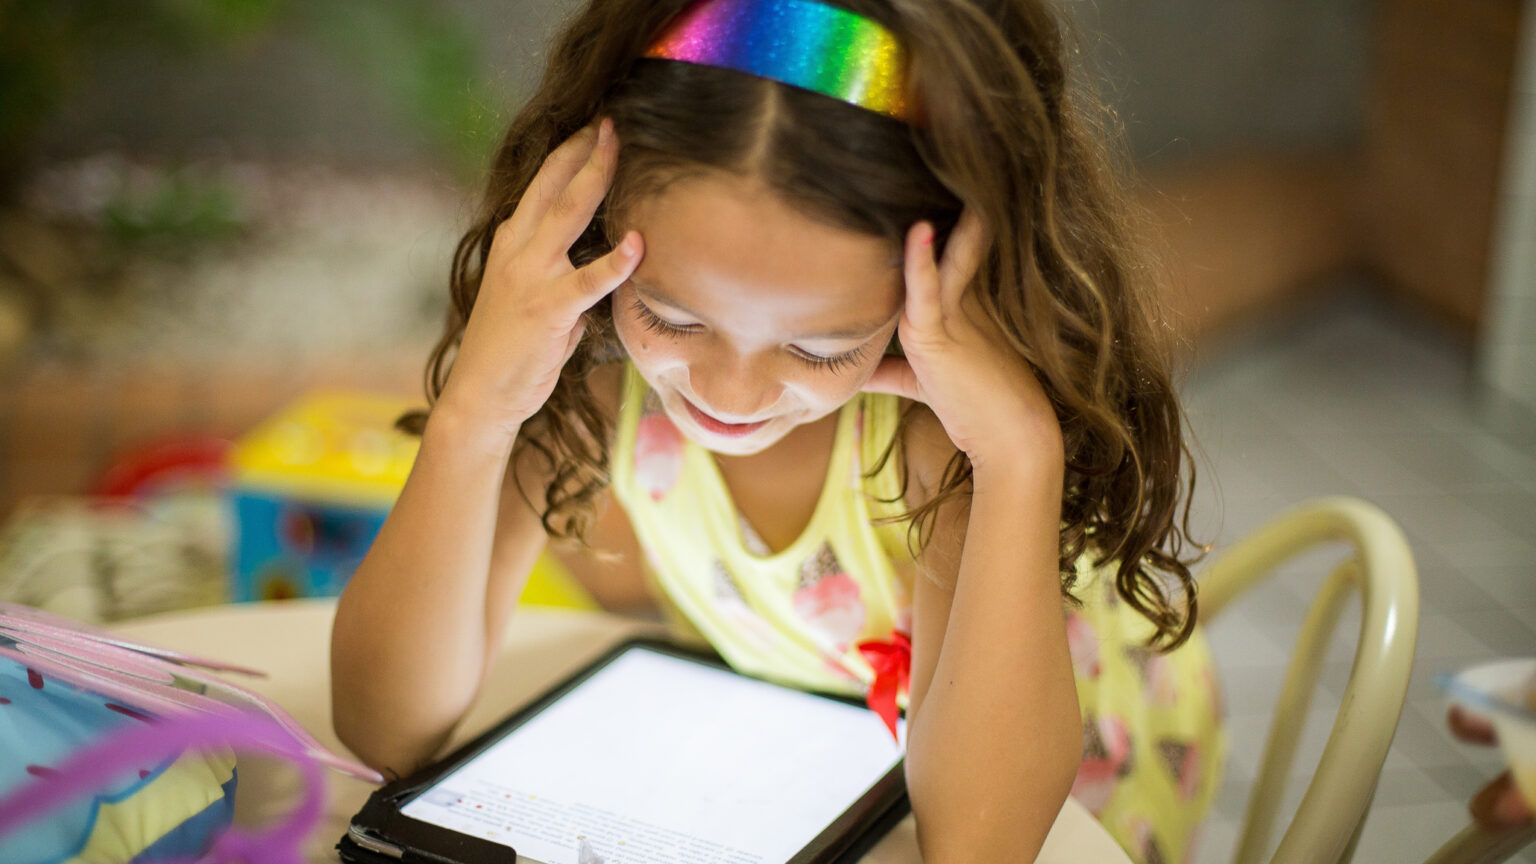 Kids are immersed in smart tech, and its up to parents to help them safely navigate through it. Image: Patricia Prudente on Unsplash.